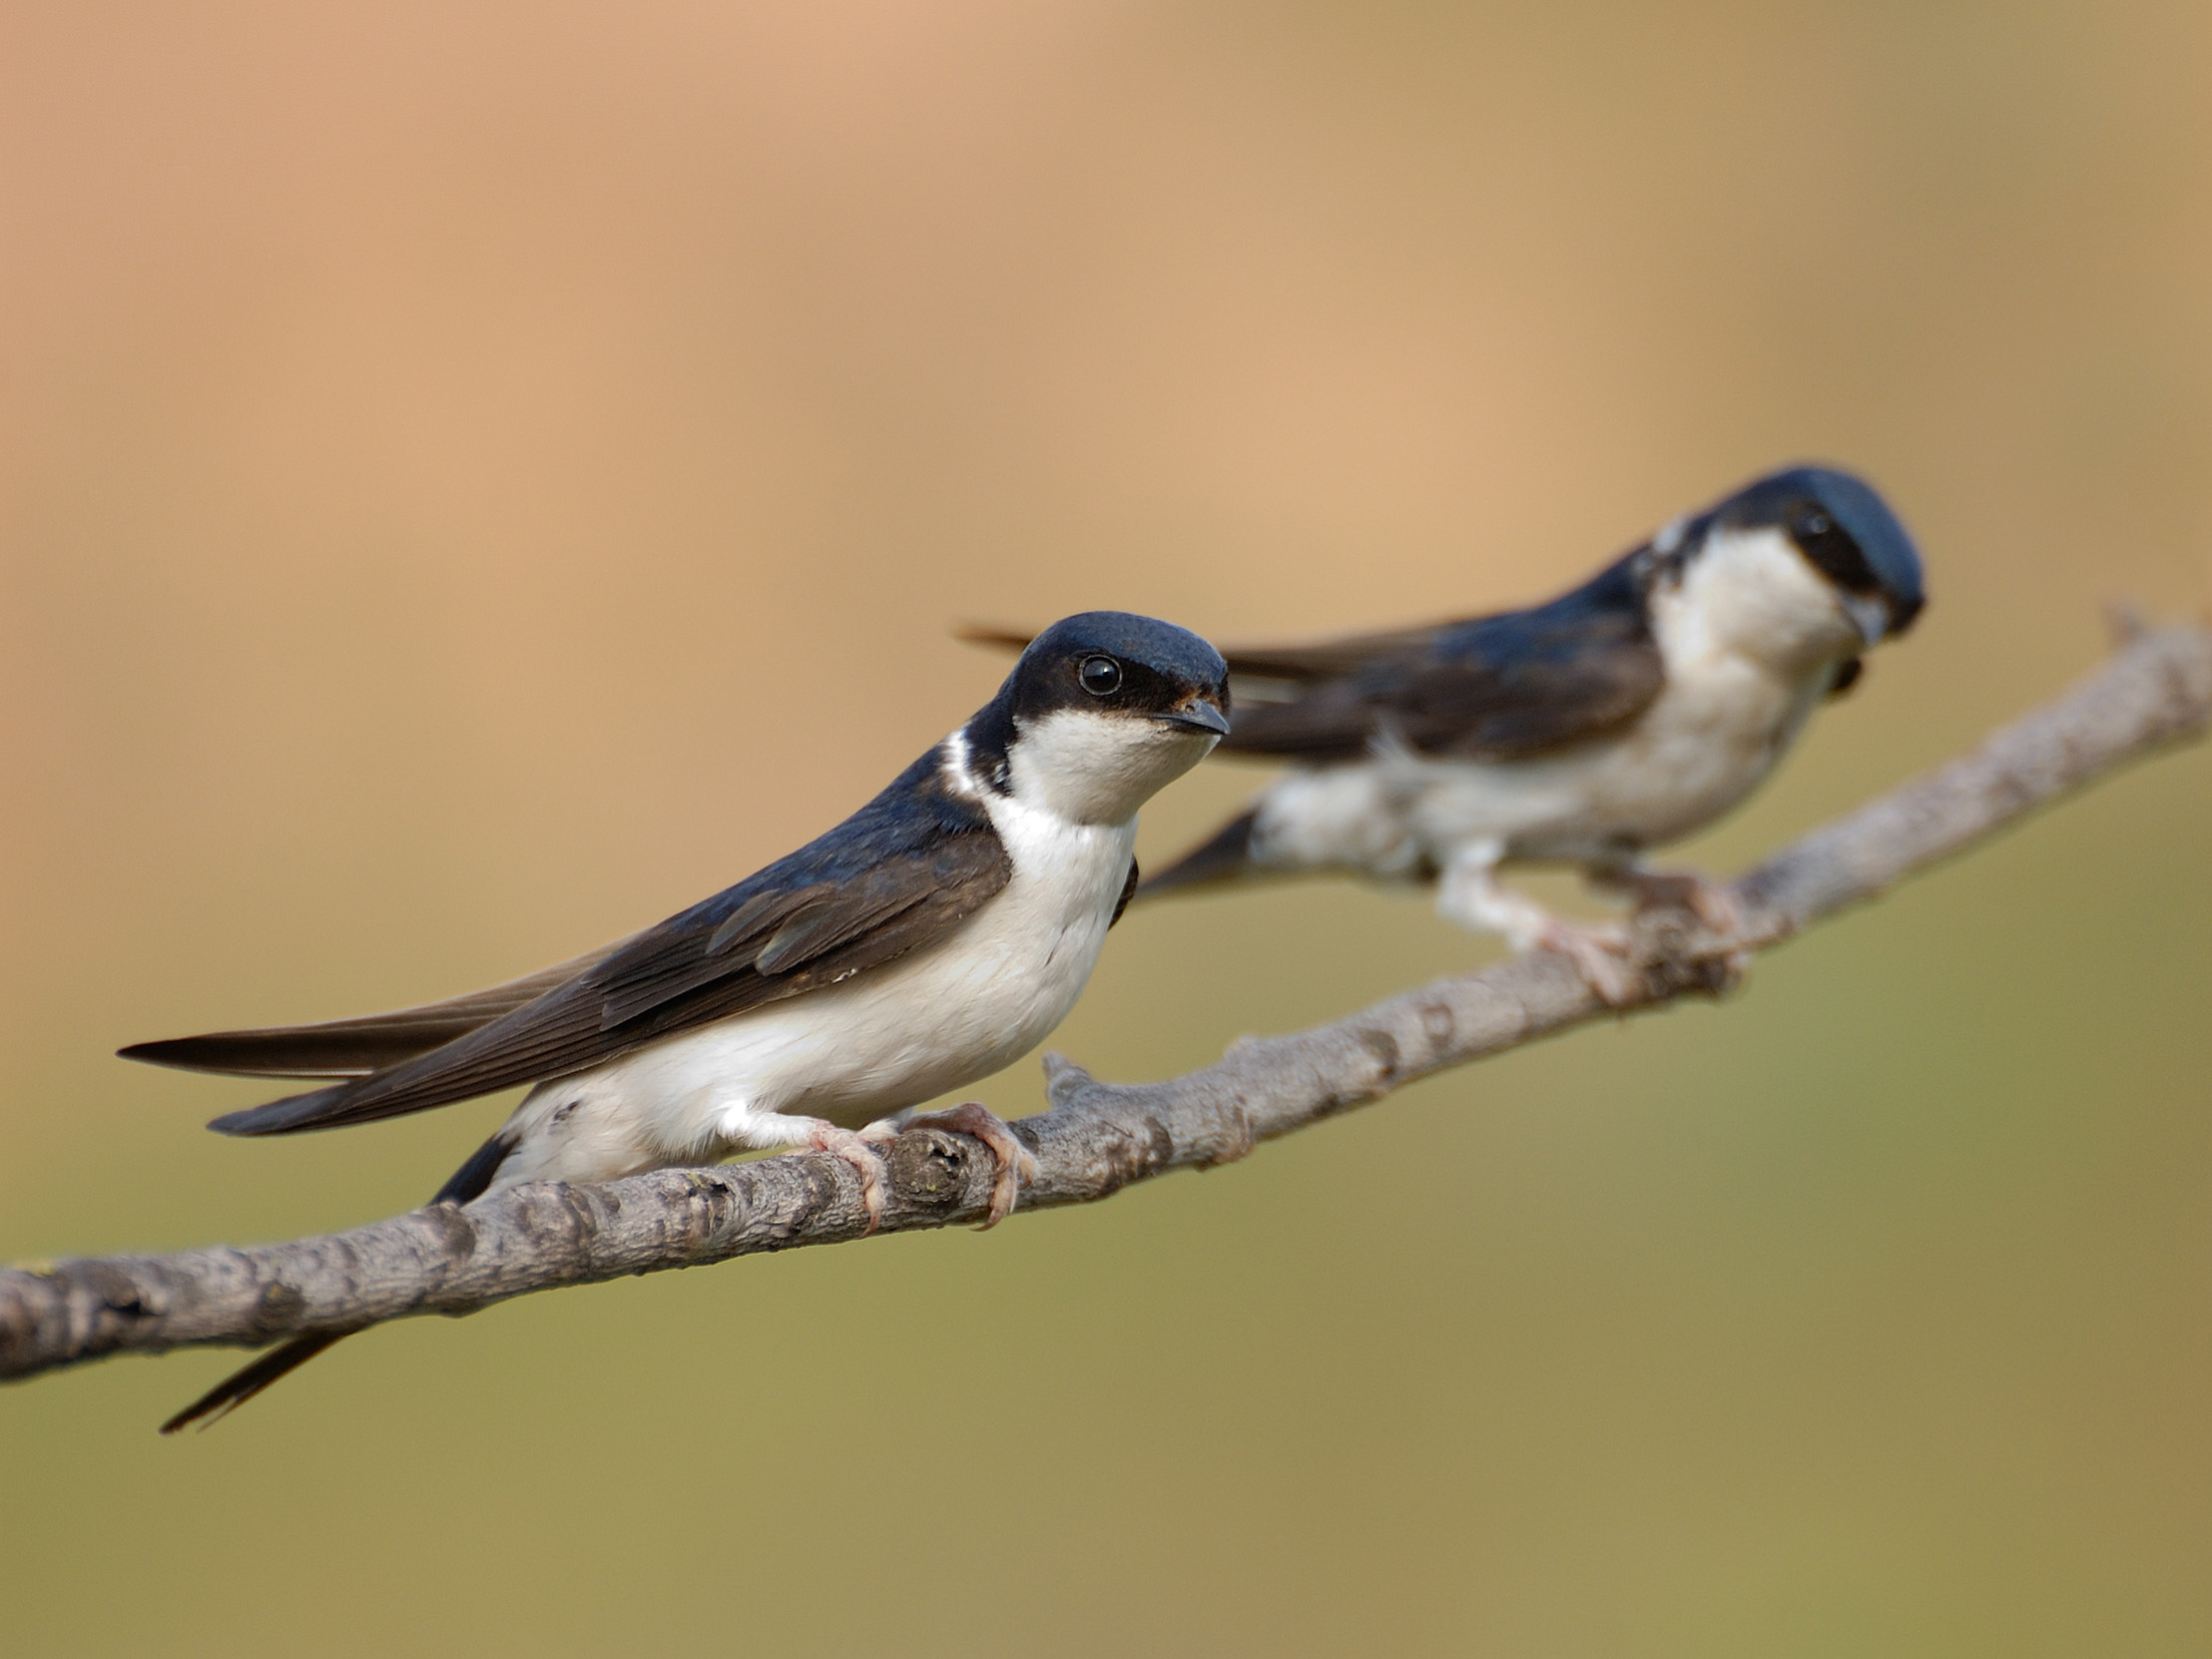 A pair of House Martins perched on a branch together against a blurred background. 